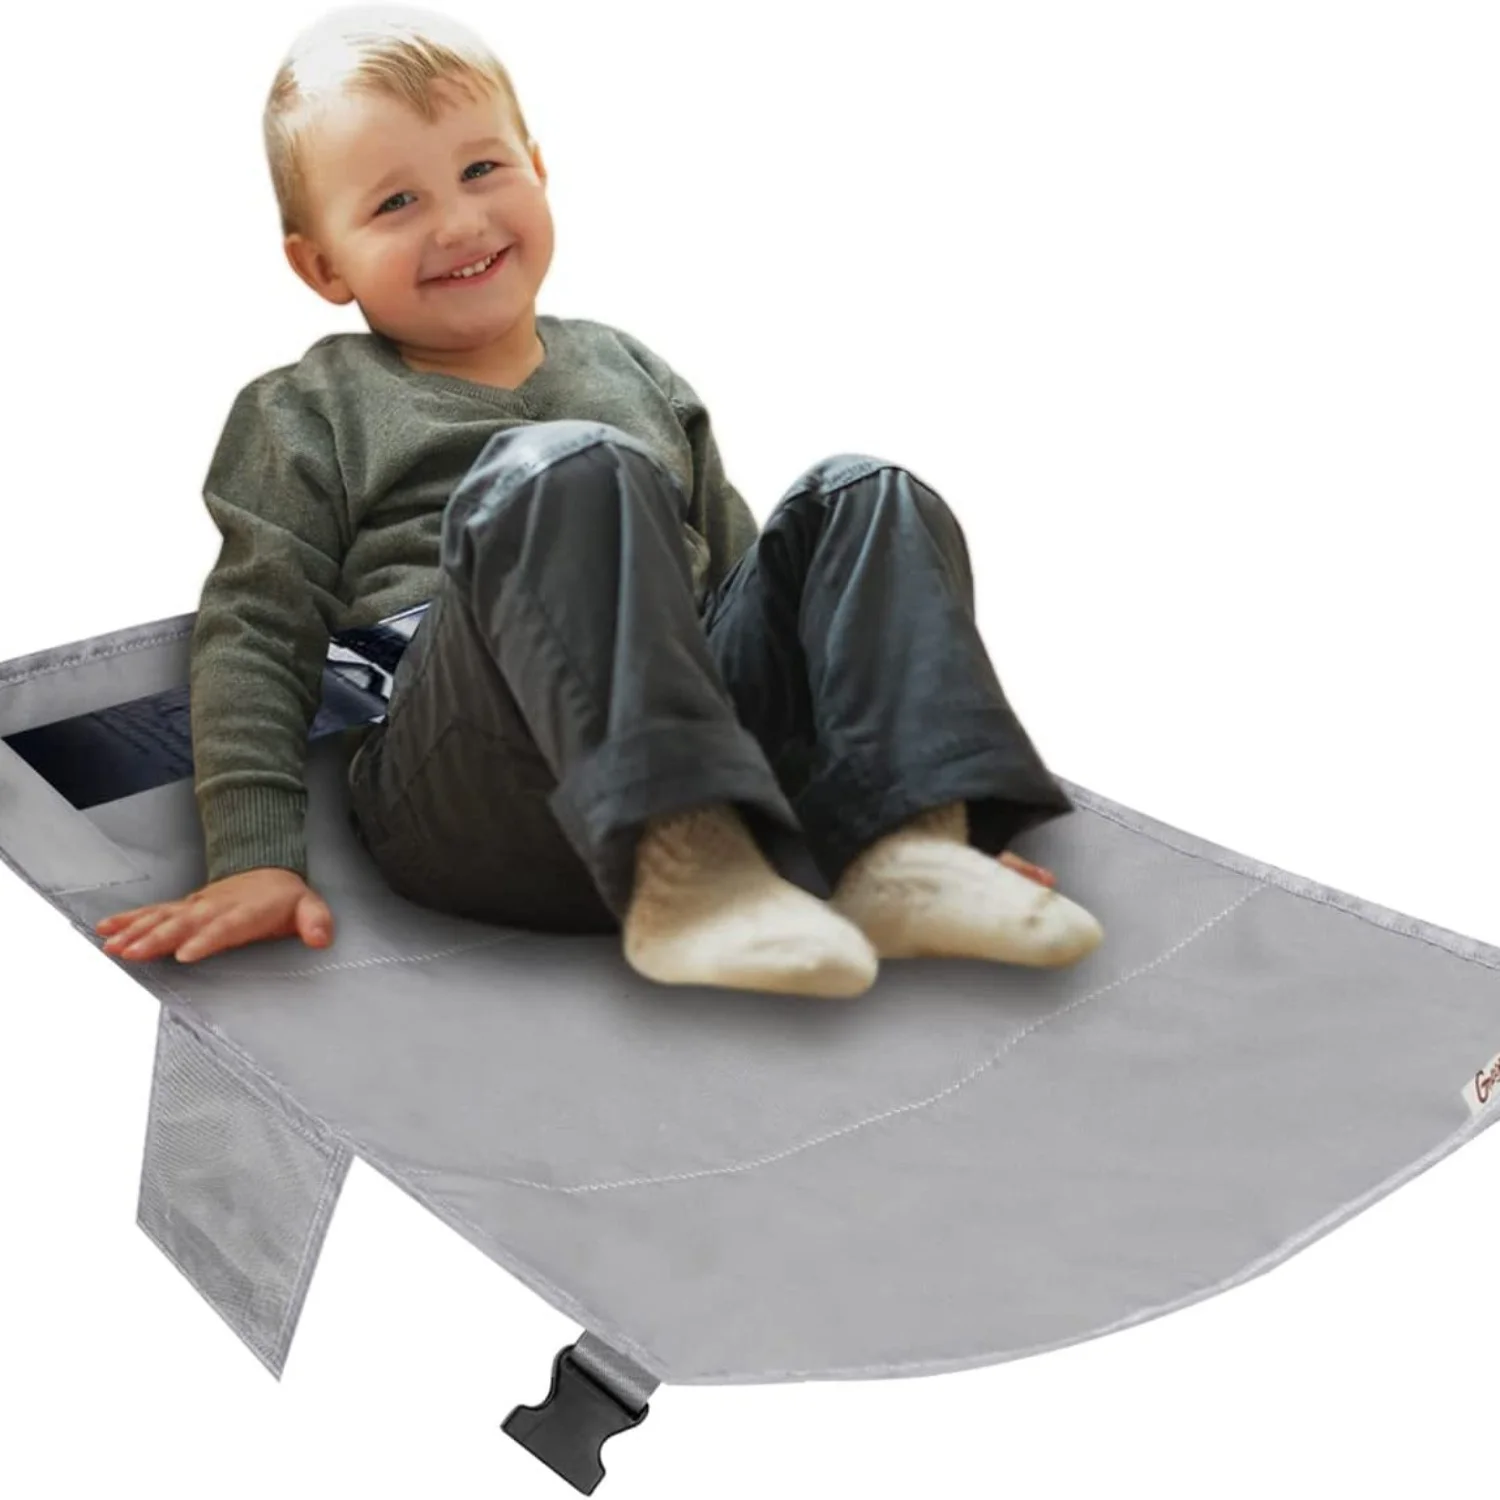 

Kids Airplane Seat Extender Bed Portable Travel Foot Hammock for Kids Plane Travel Foot Rest Baby Airplane Footrest Bed